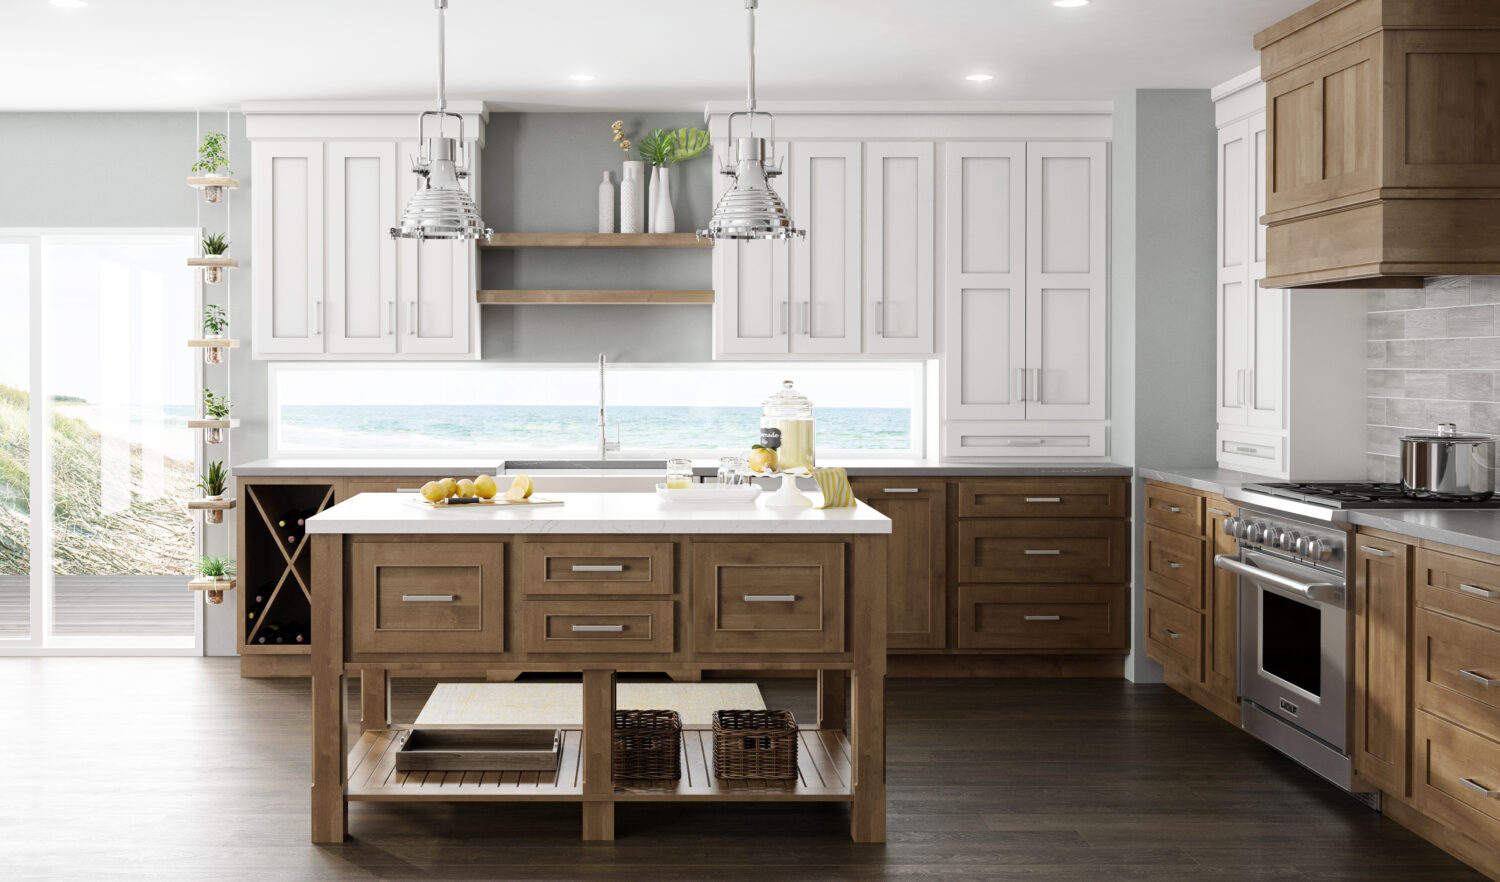 A color palette inspired by nature in a new kitchen remodel featuring Dura Supreme Cabinetry. This kitchen design features standard overlay cabinet doors.